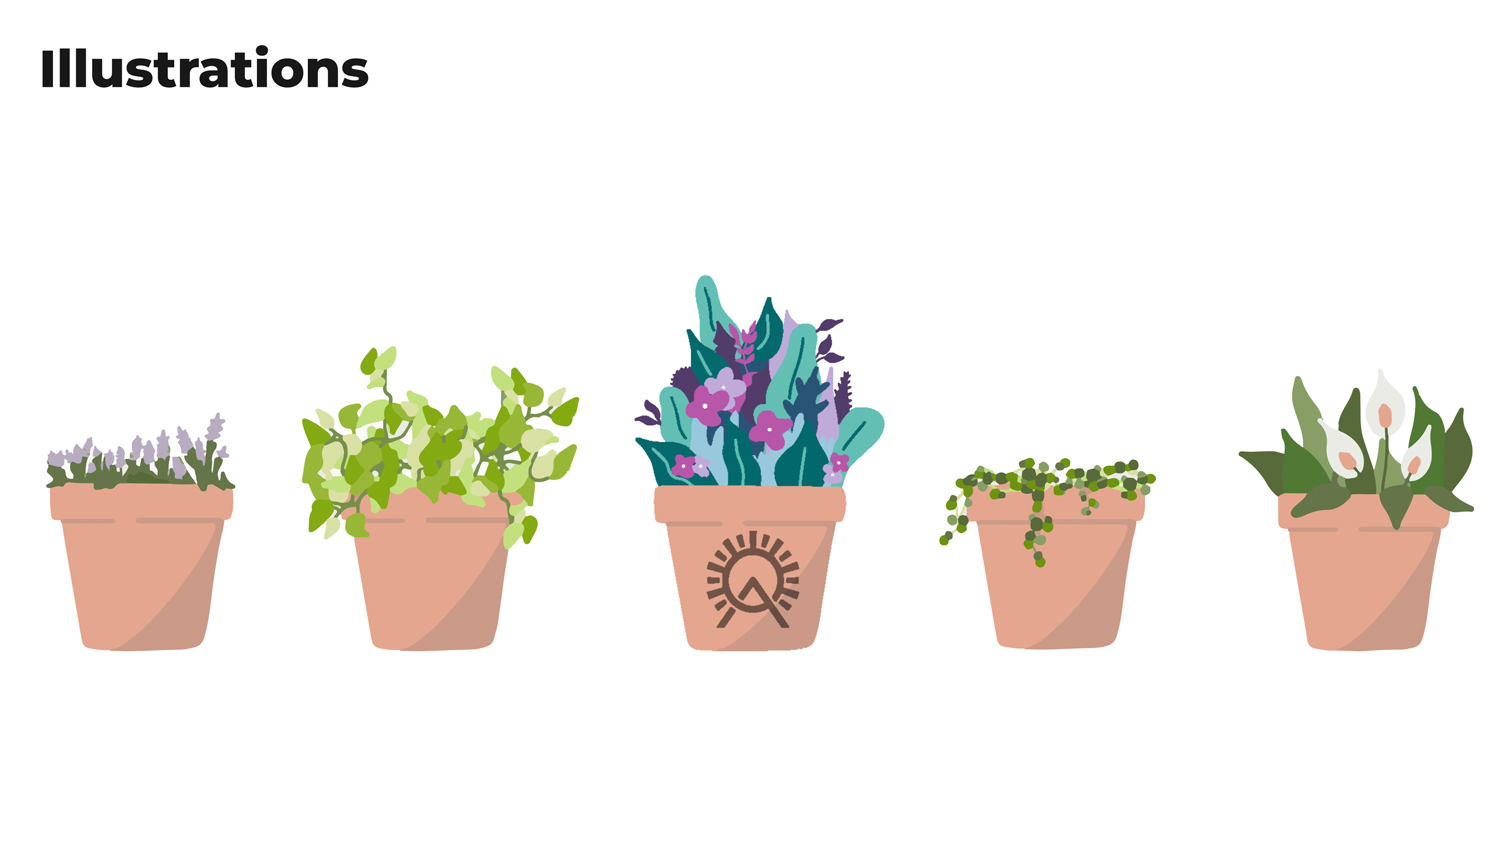 Illustrations of five potted plants, center one having the Oasis Alliance logo marked on the pot.